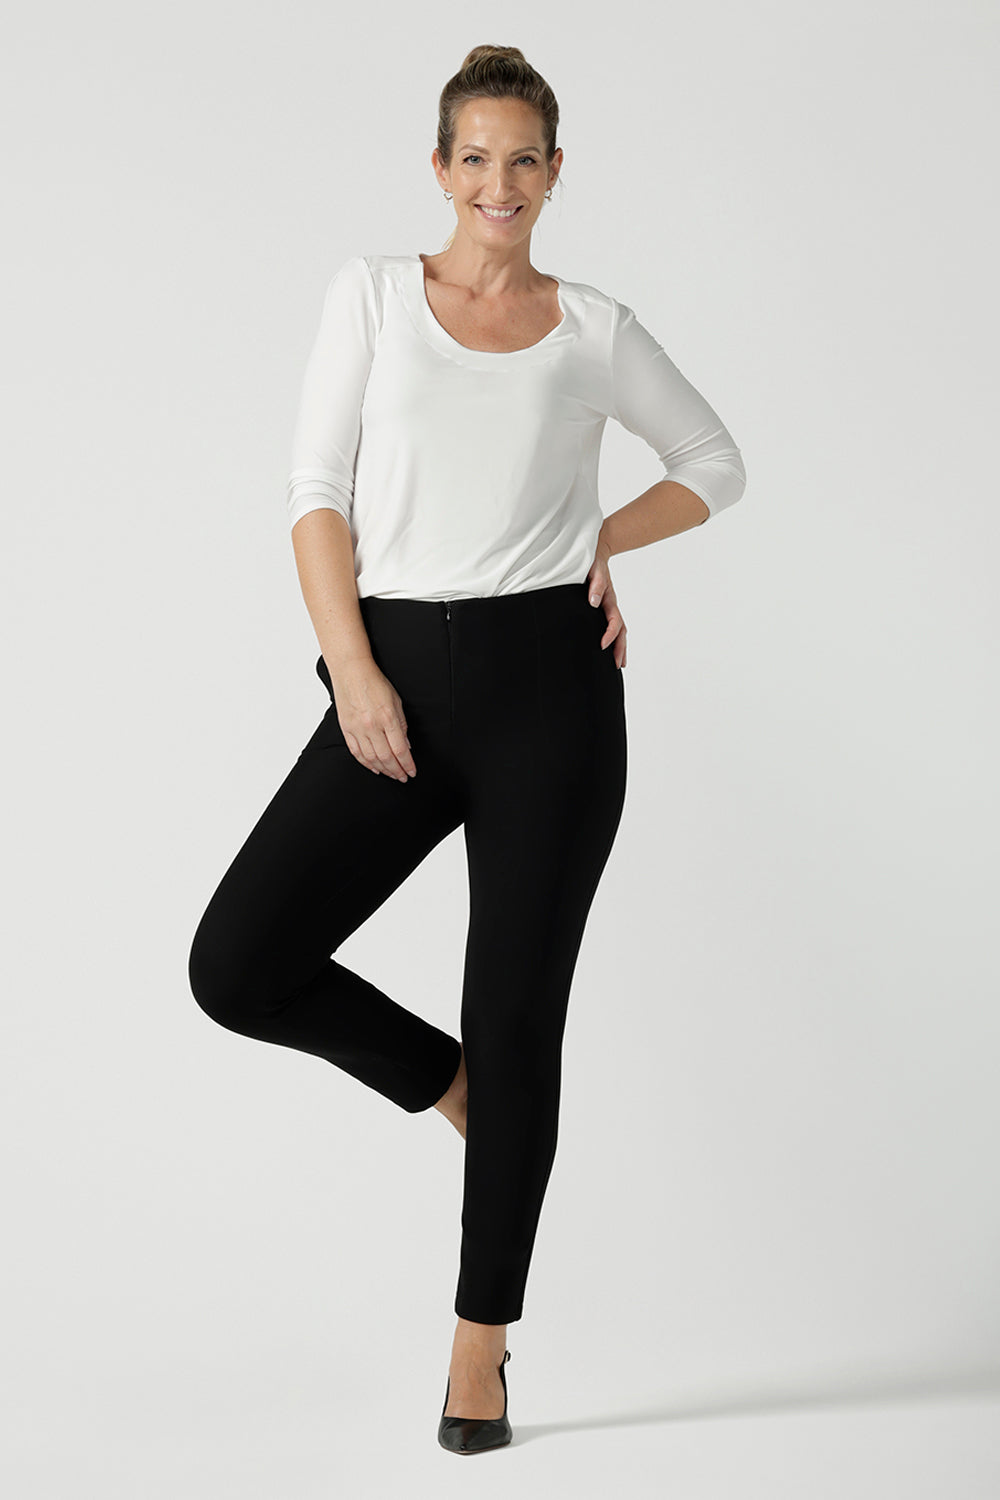 Size 10 woman wears the Jules Top in Vanilla. A 3/4 sleeve comfortable jersey top in vanilla white with a scoop neckline. Comfortable easy care jersey made in Australia for women size 8 - 24. Black ponte Brooklyn pants. 